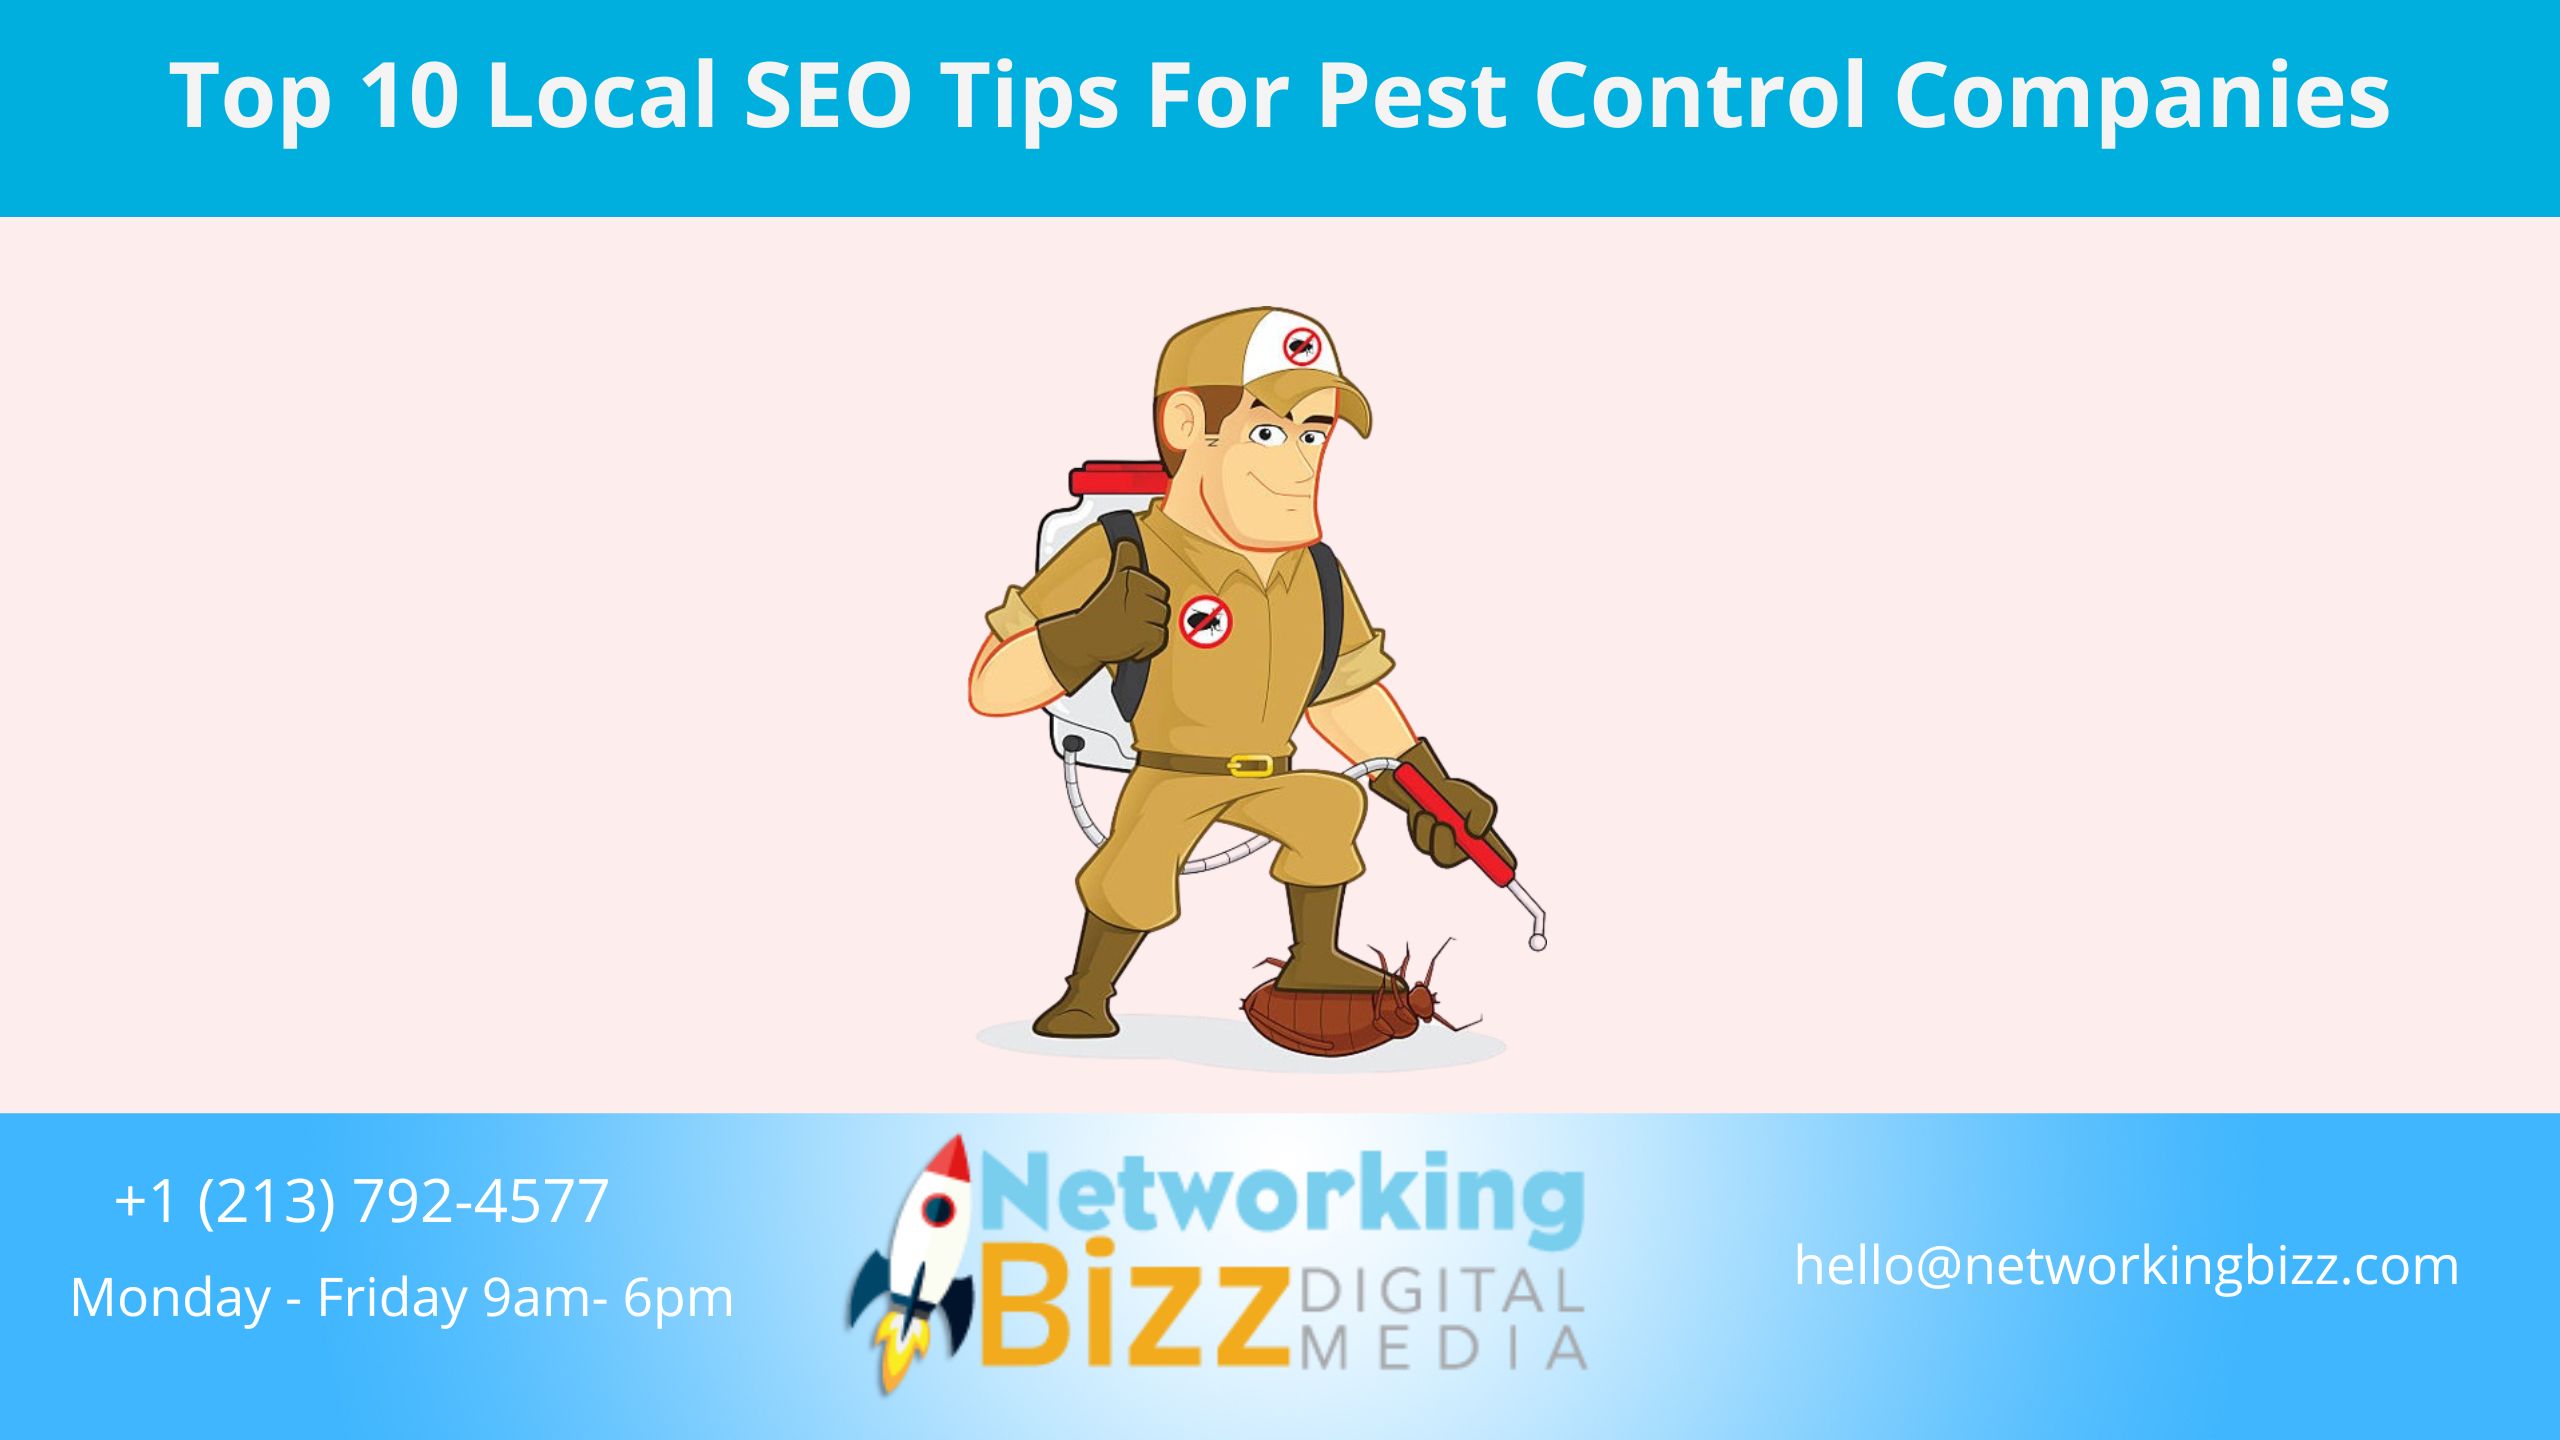 Top 10 Local SEO Tips For Pest Control Companies